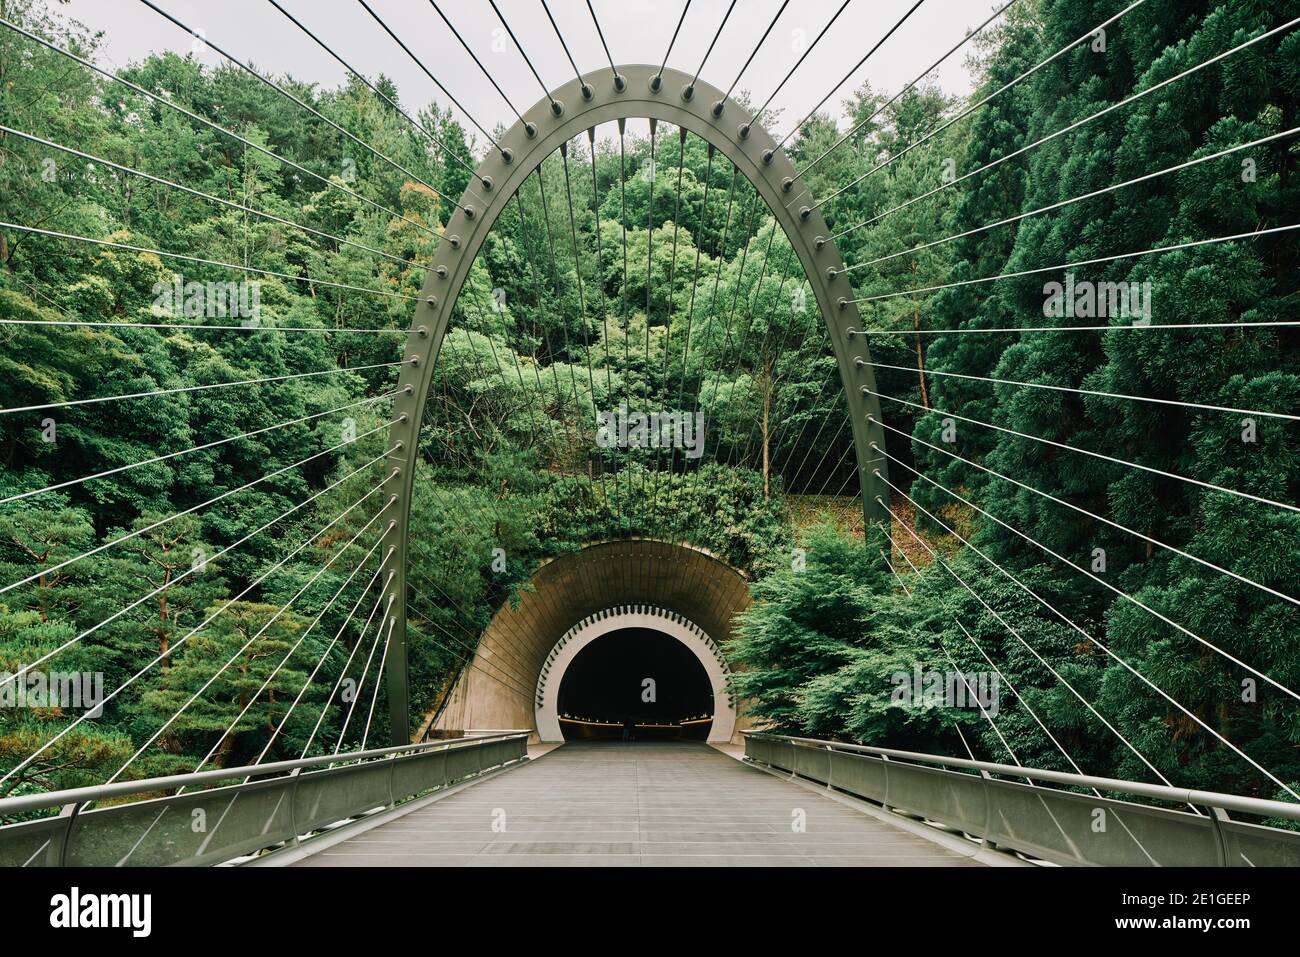 View through approach tunnel towards Miho Museum in Japan Stock Photo -  Alamy